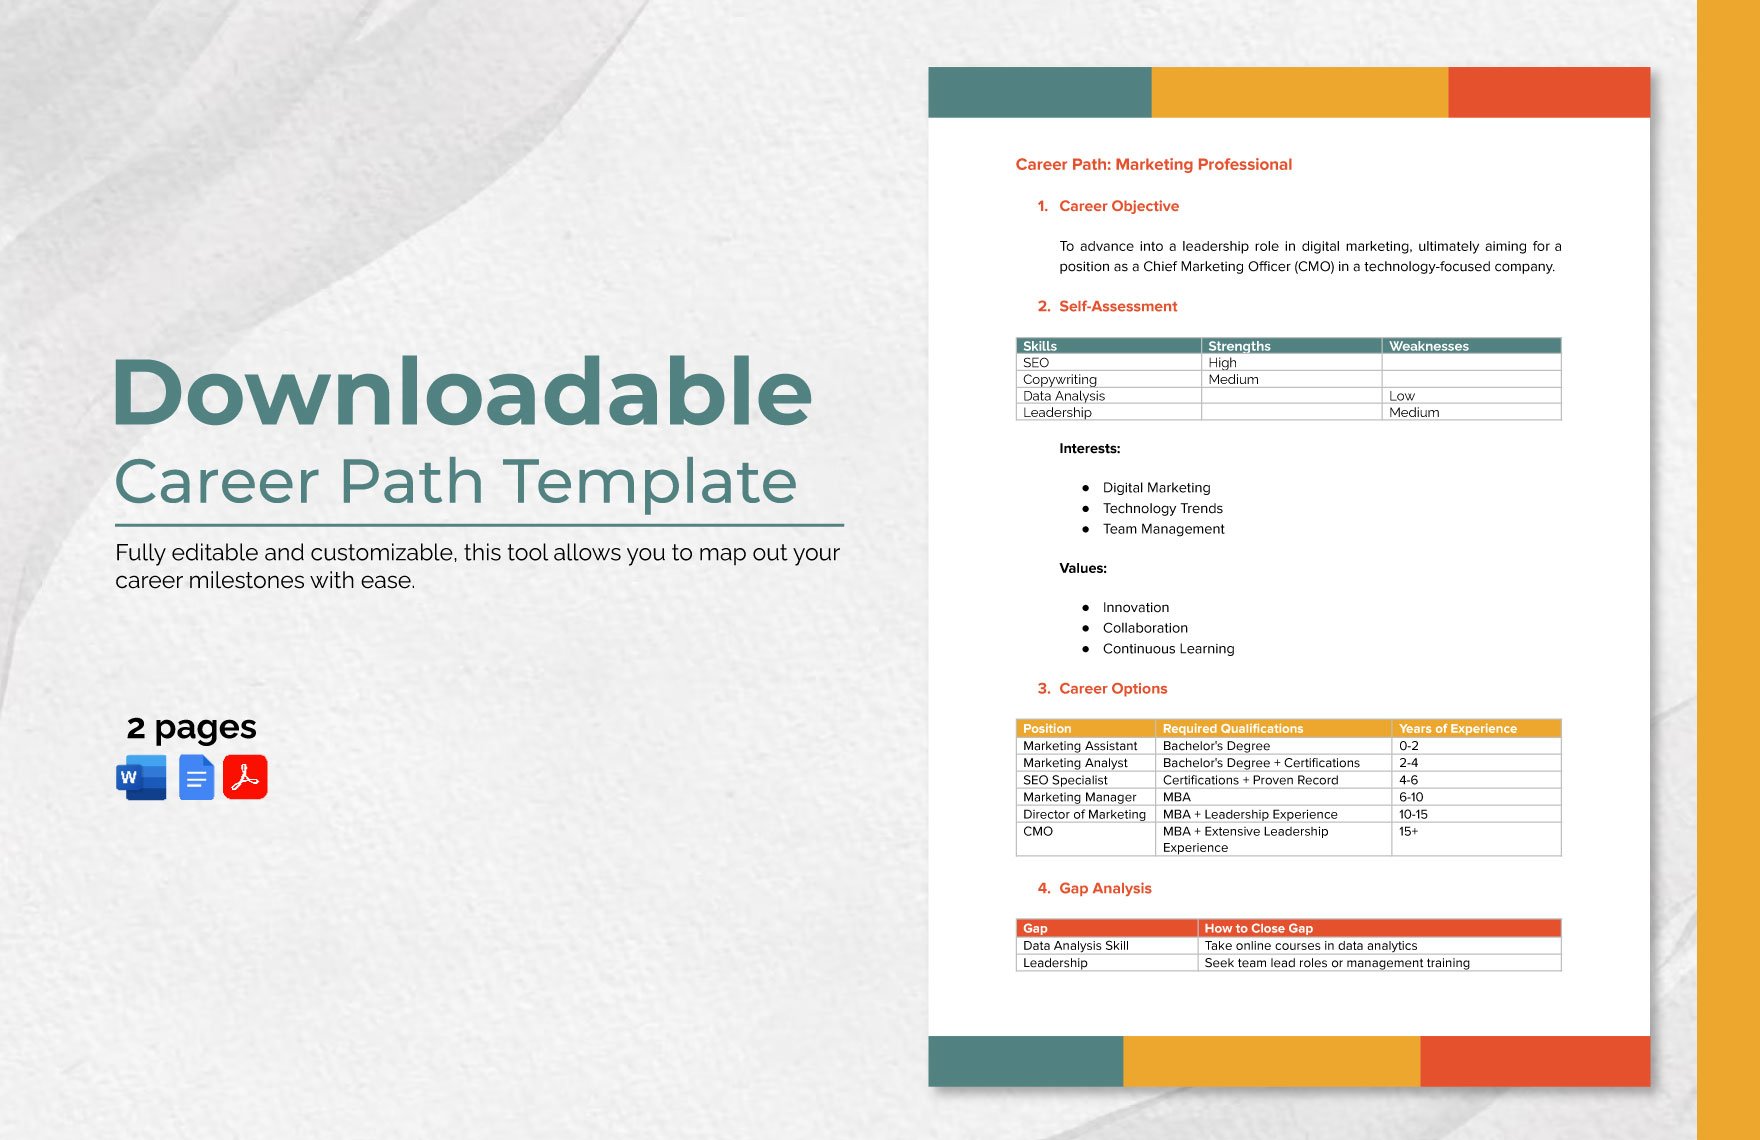 Downloadable Career Path Template